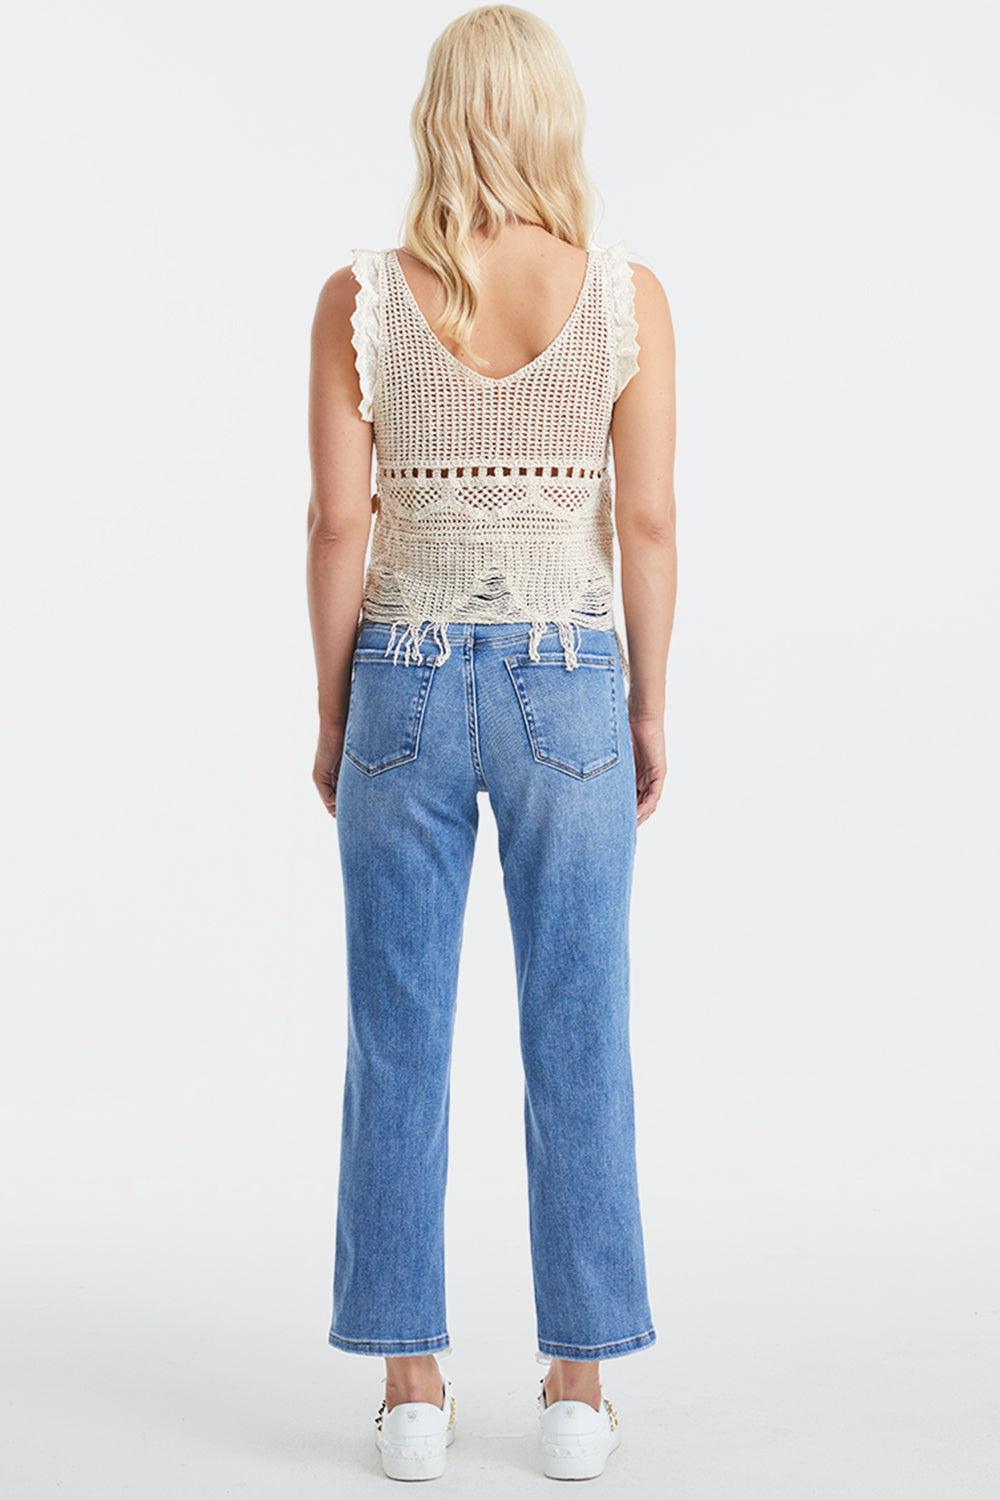 a woman in a tank top and jeans back view